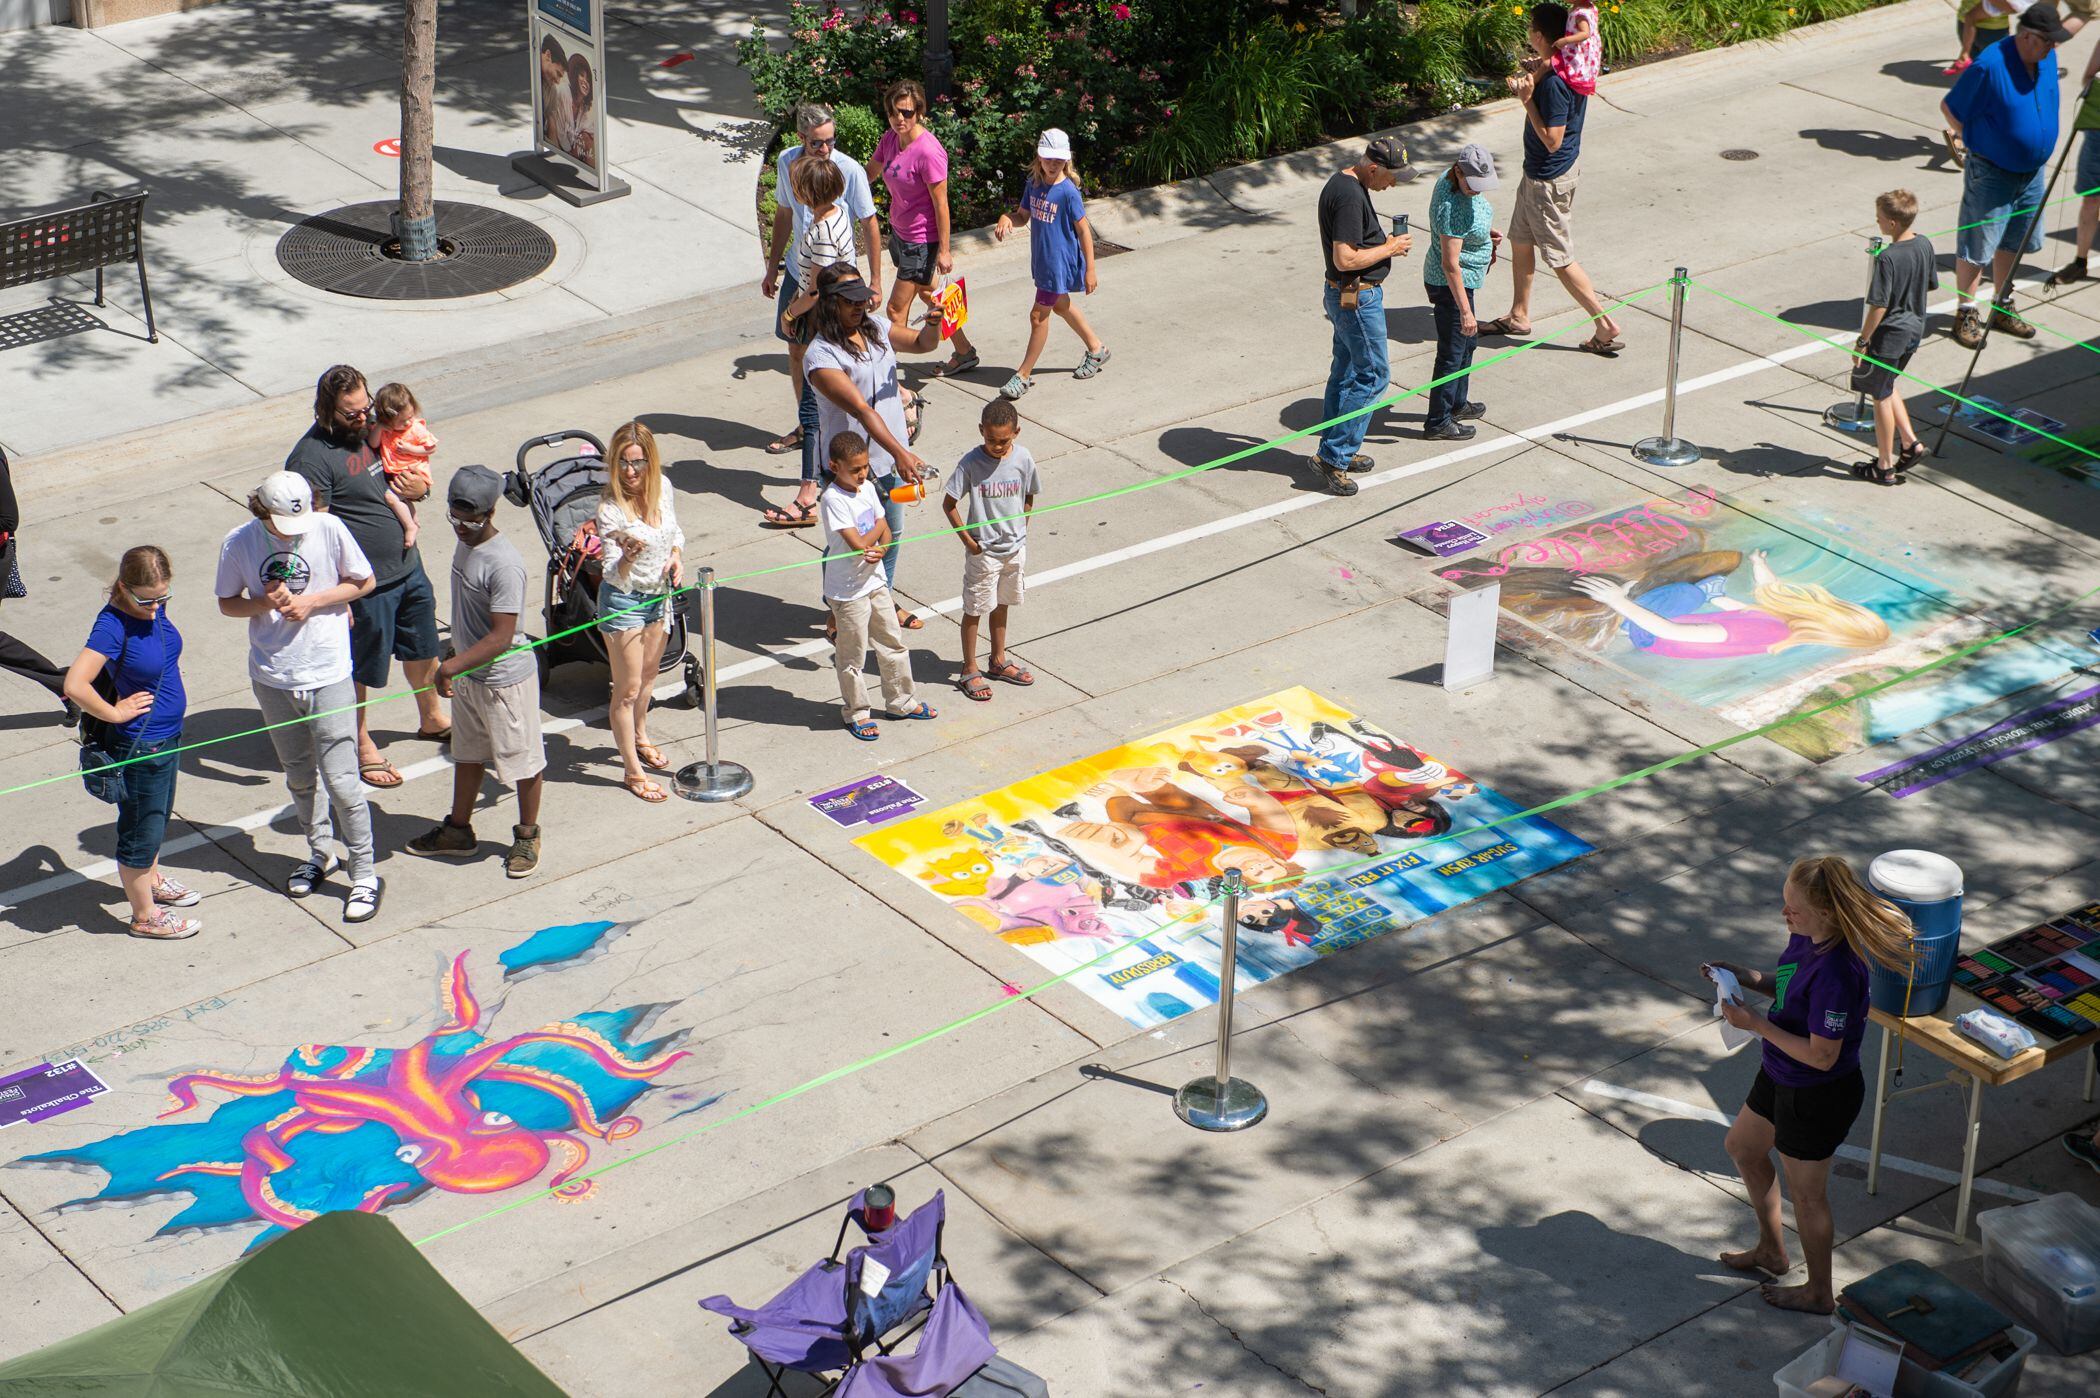 (Rachel Molenda | The Salt Lake Tribune) Spectators take in the work of artists at a chalk art festival in 2018 at The Gateway in Salt Lake City. Such events can help attract families.